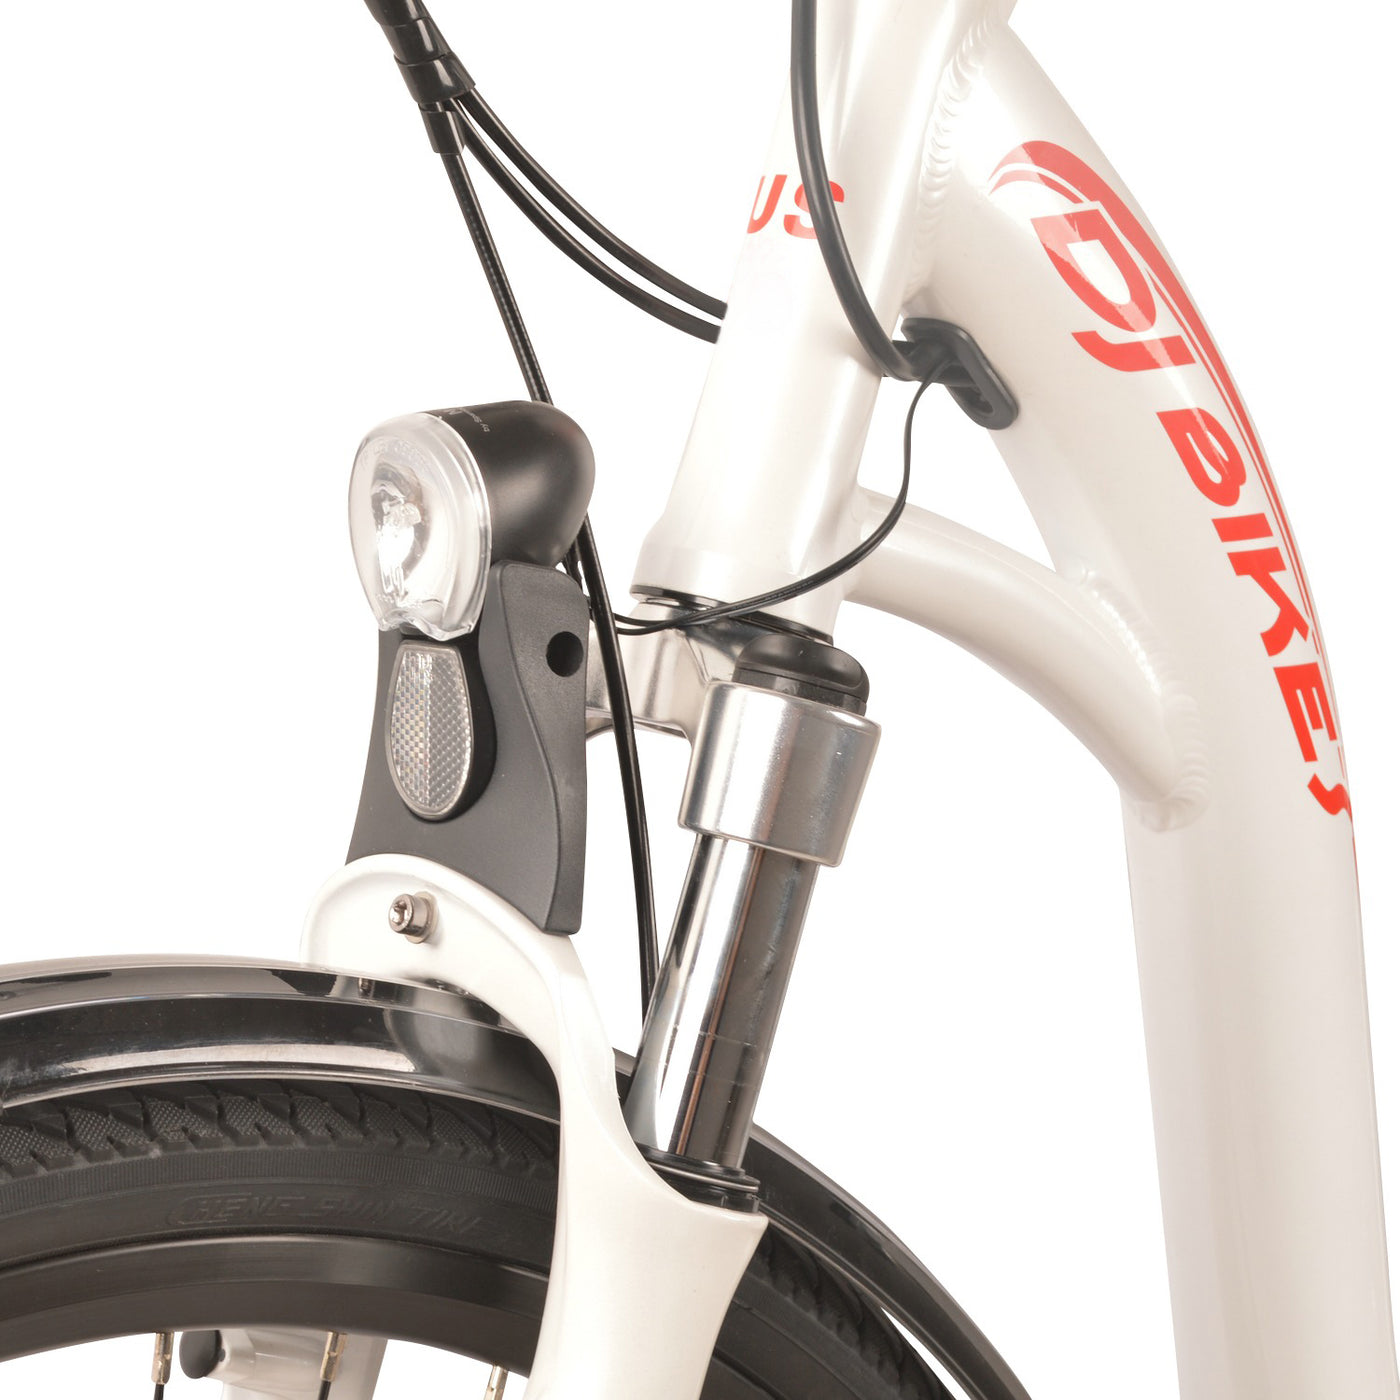 DJ City Bike, electric city bike by DJ bikes, equipped with integrated front headlight